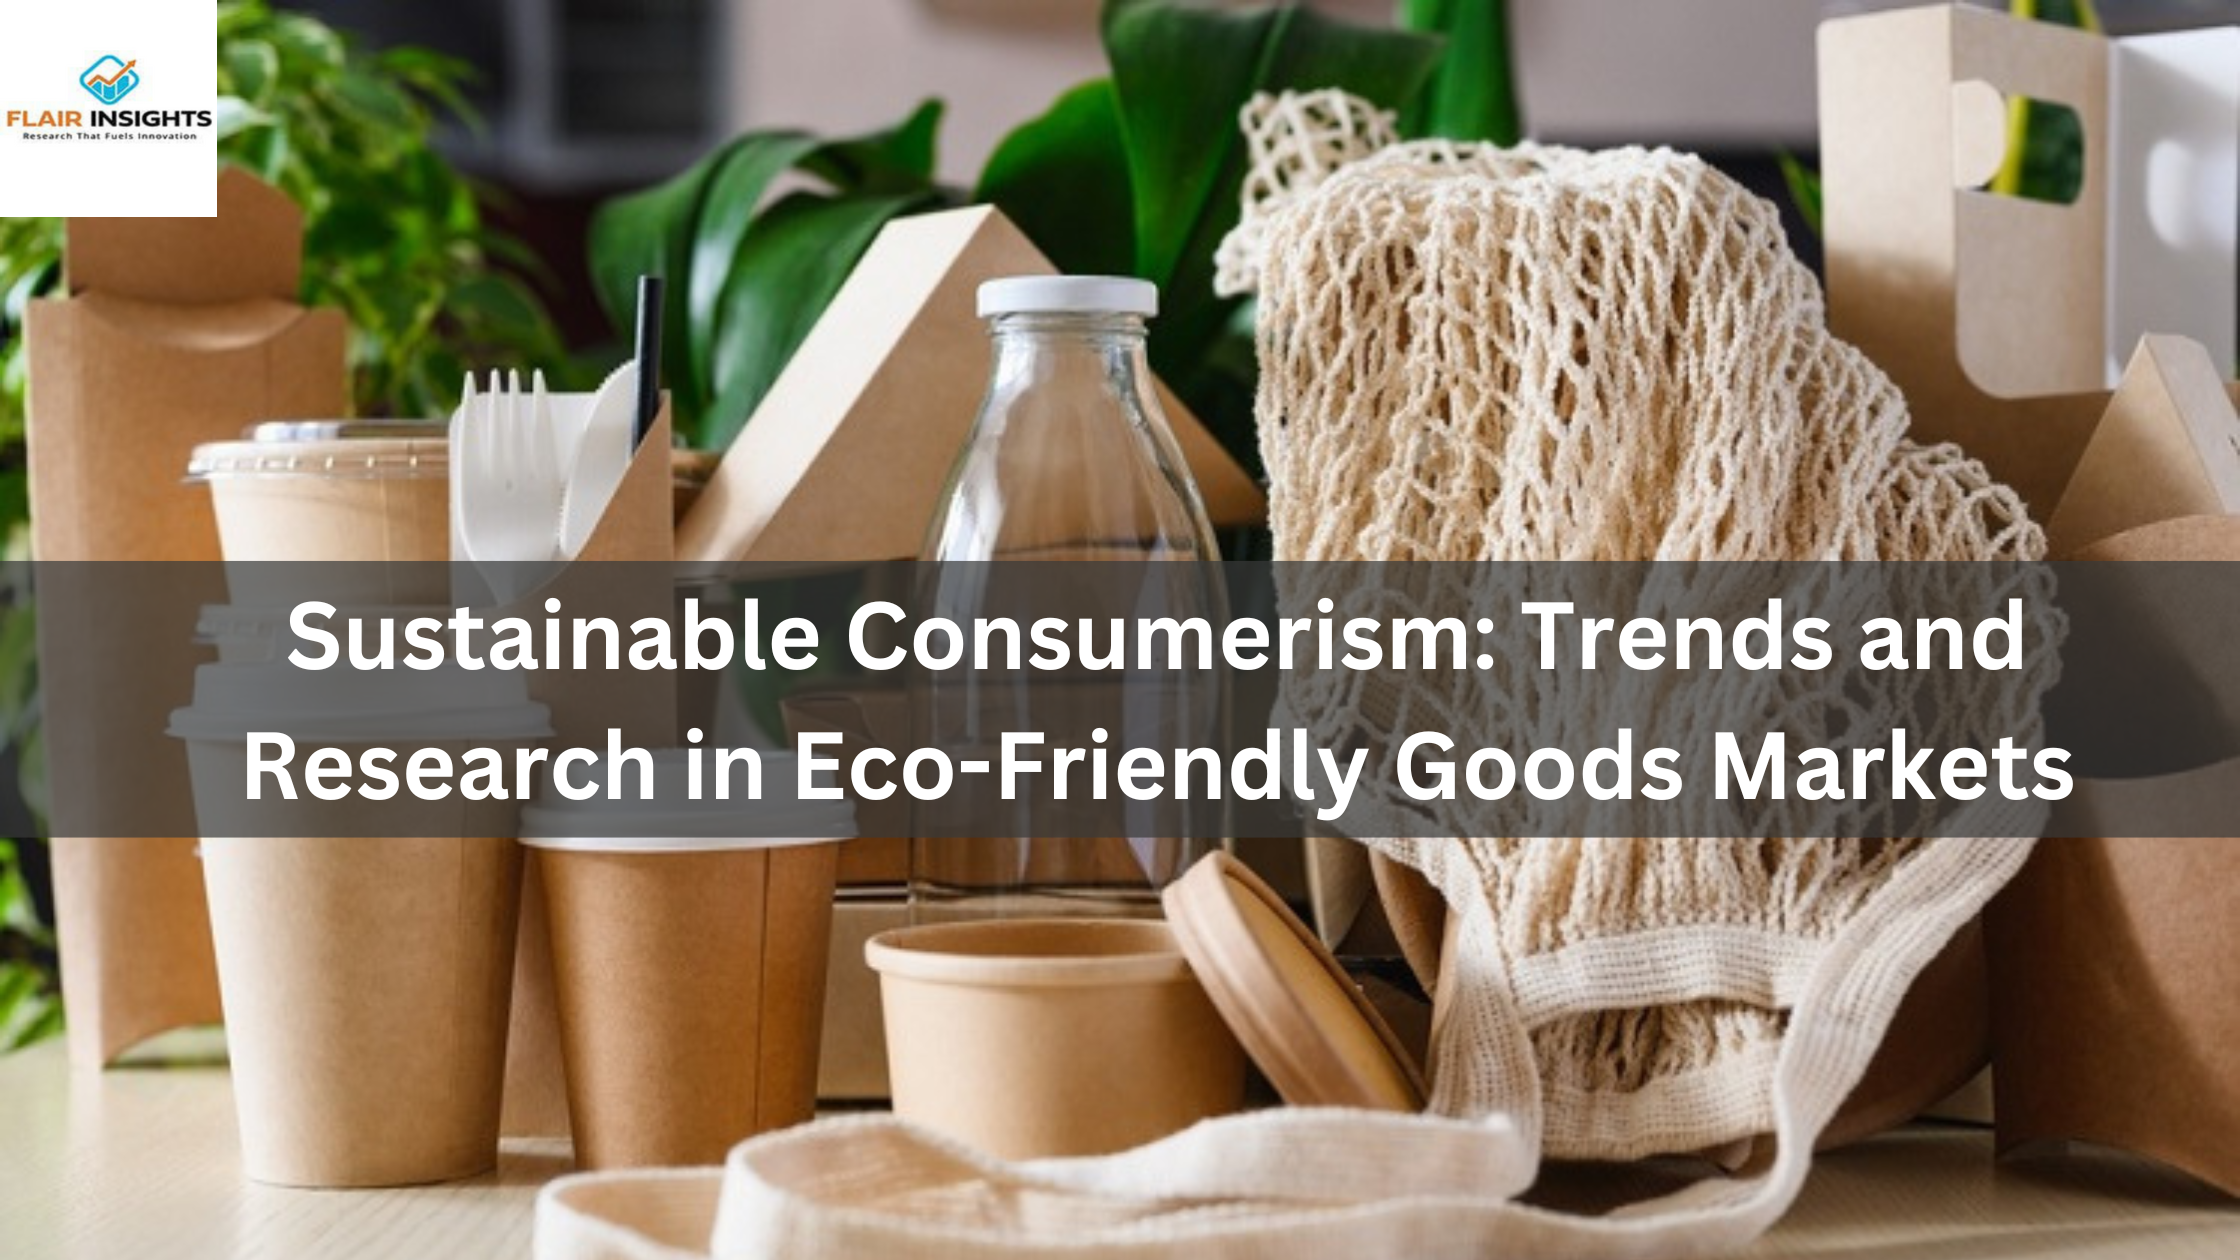 Sustainable Consumerism: Trends and Research in Eco-Friendly Goods Markets